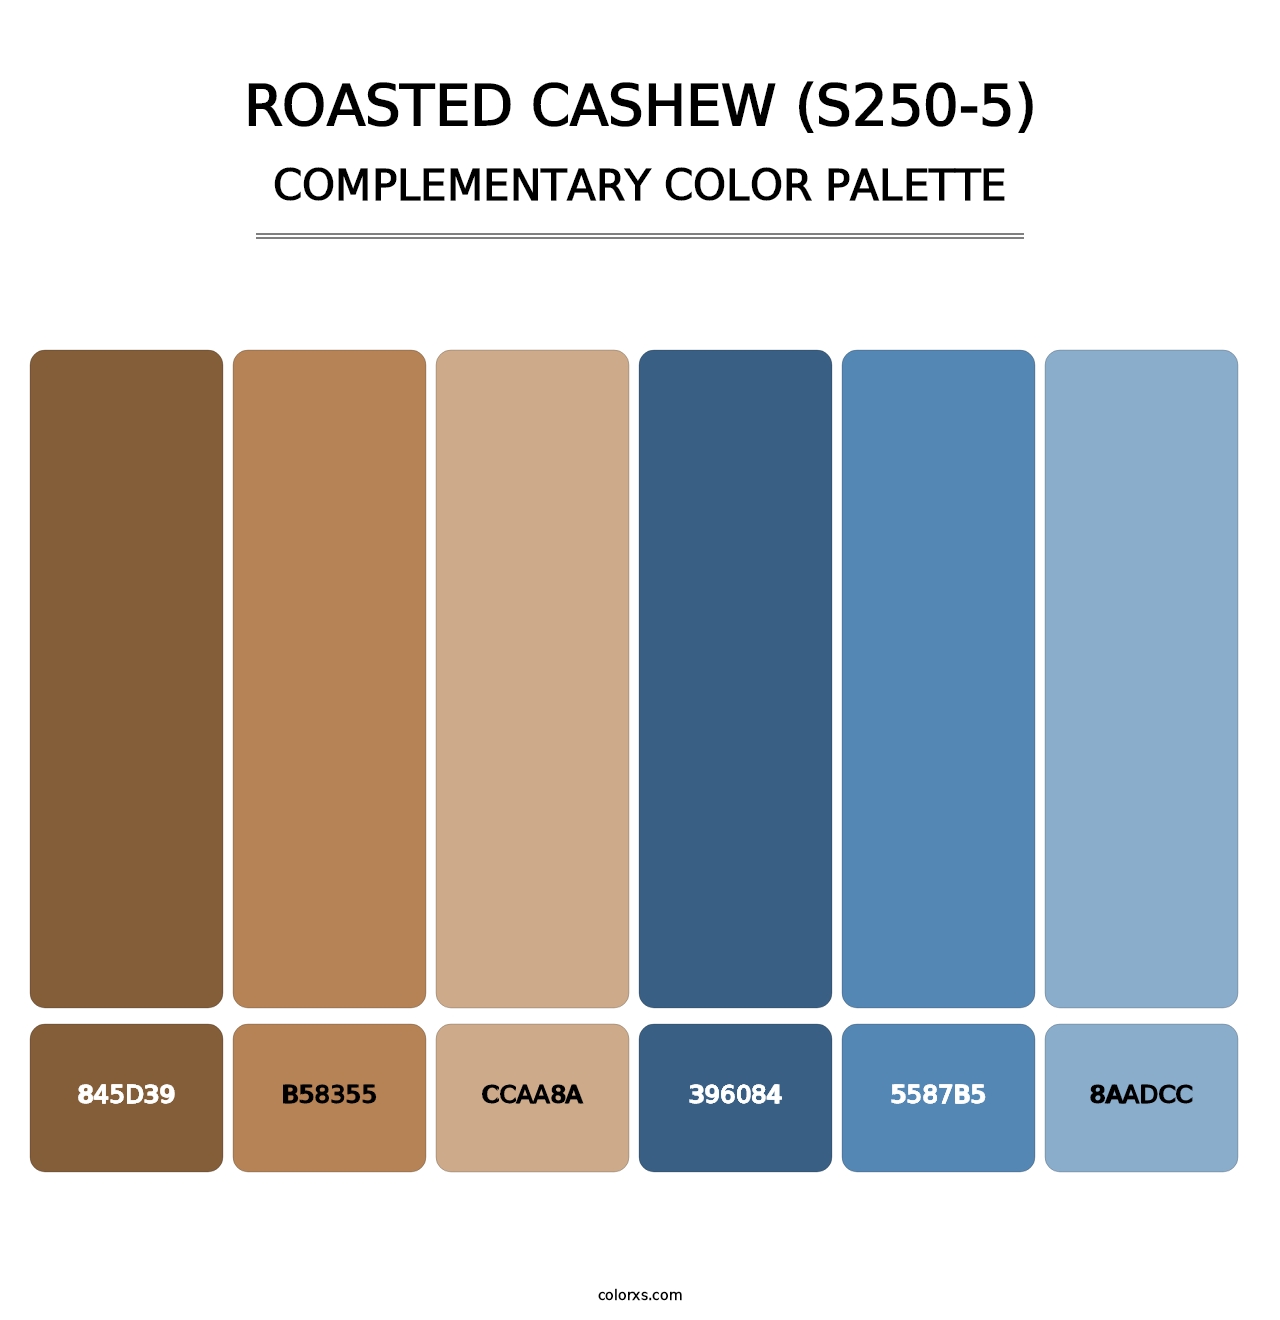 Roasted Cashew (S250-5) - Complementary Color Palette